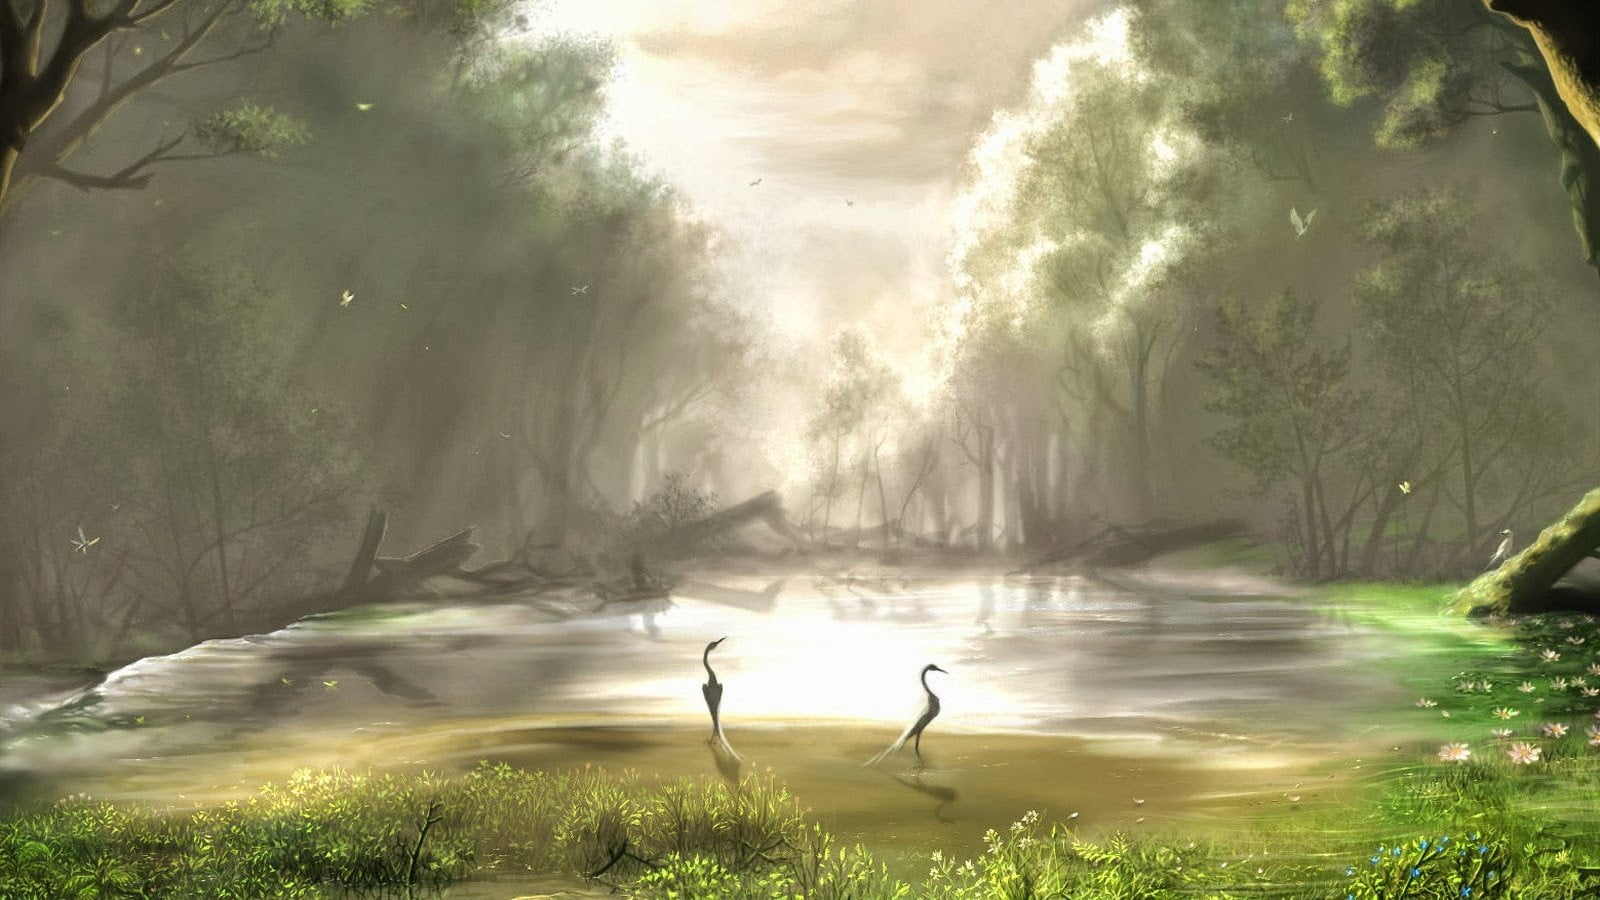 two birds near body of water and trees illustration, fantasy art